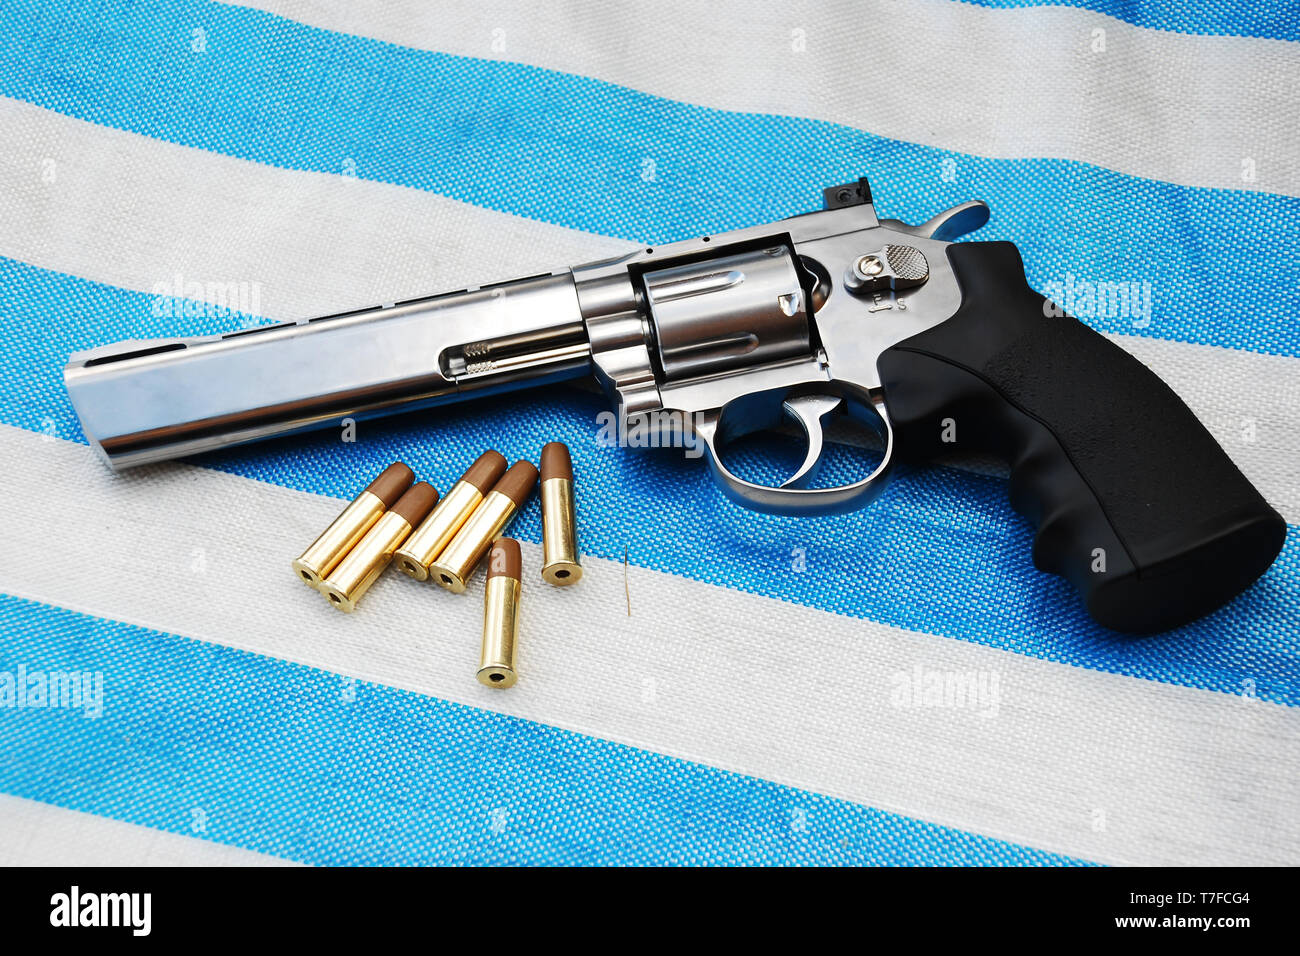 Airgun on white blue background close up view Stock Photo